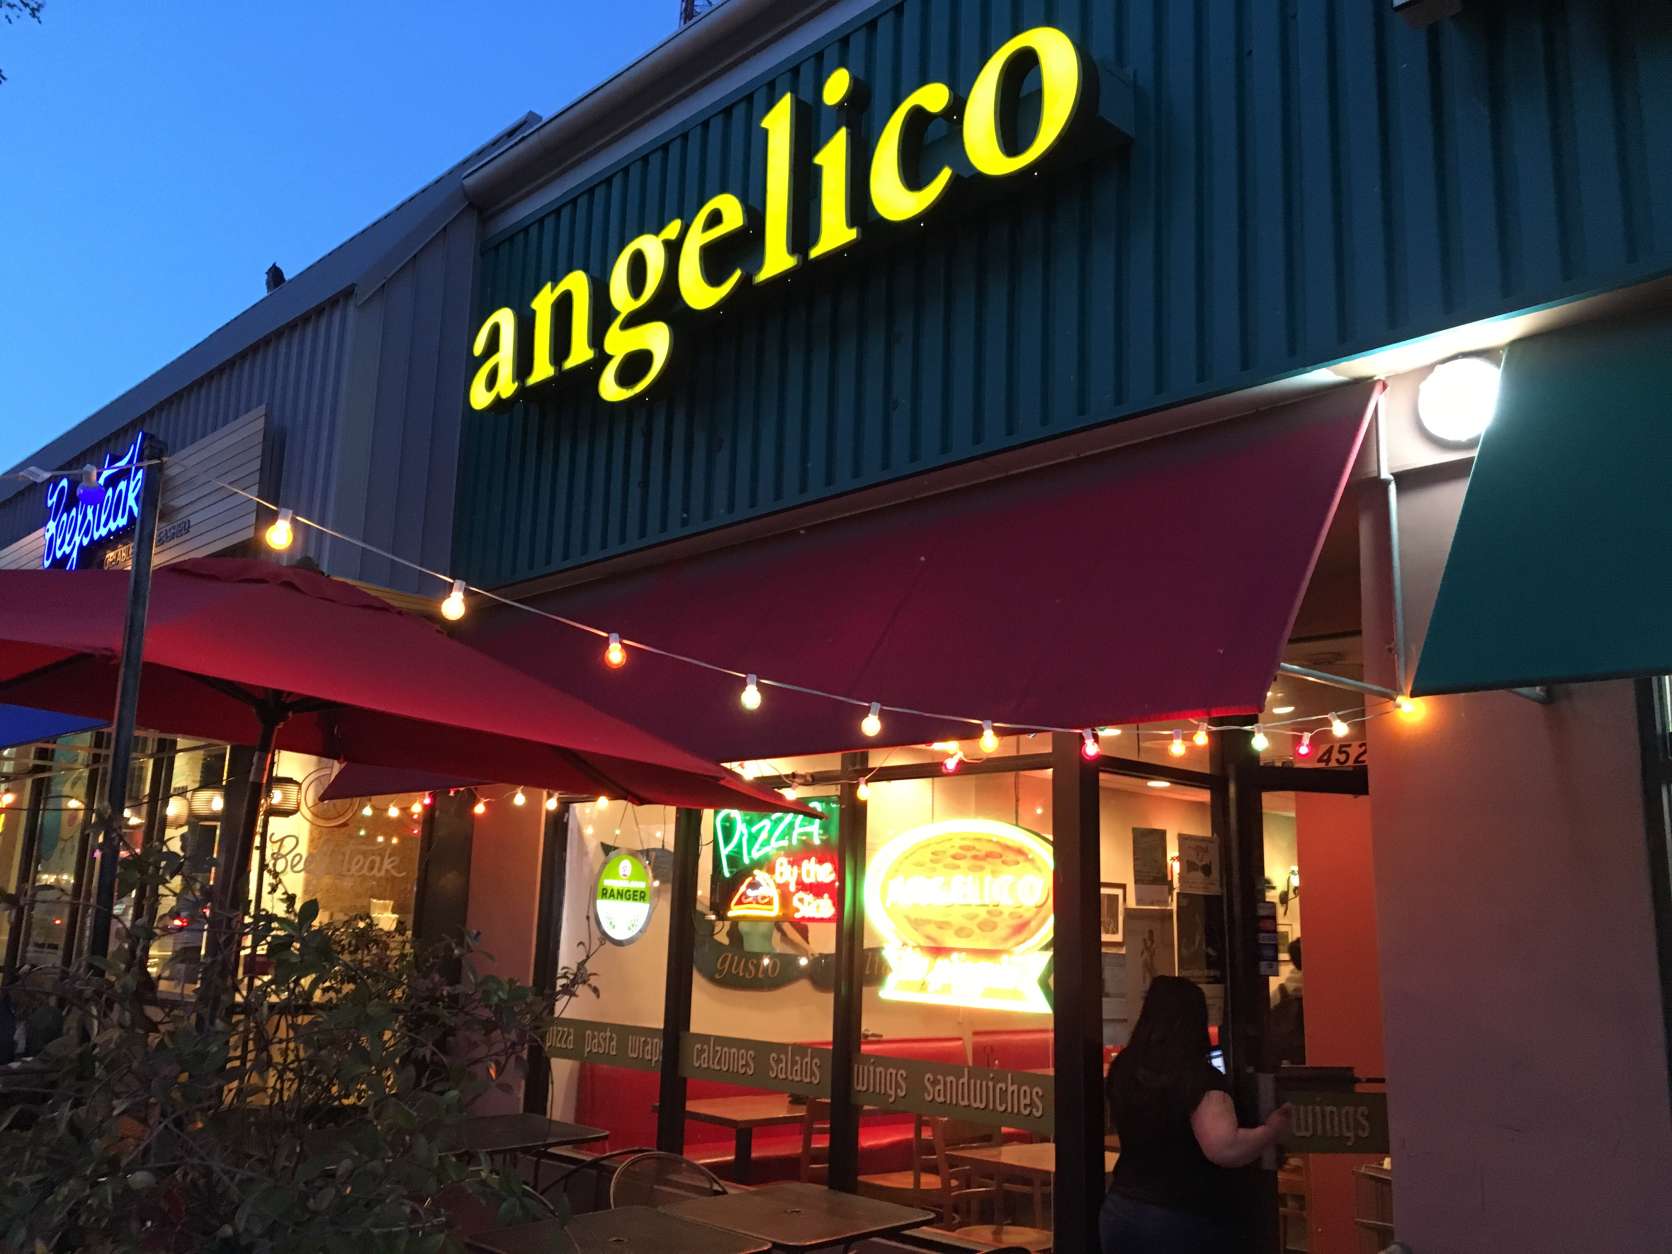 The Angelico pizza shop on Wisconsin Avenue in Tenleytown. (WTOP/Mike Murillo)